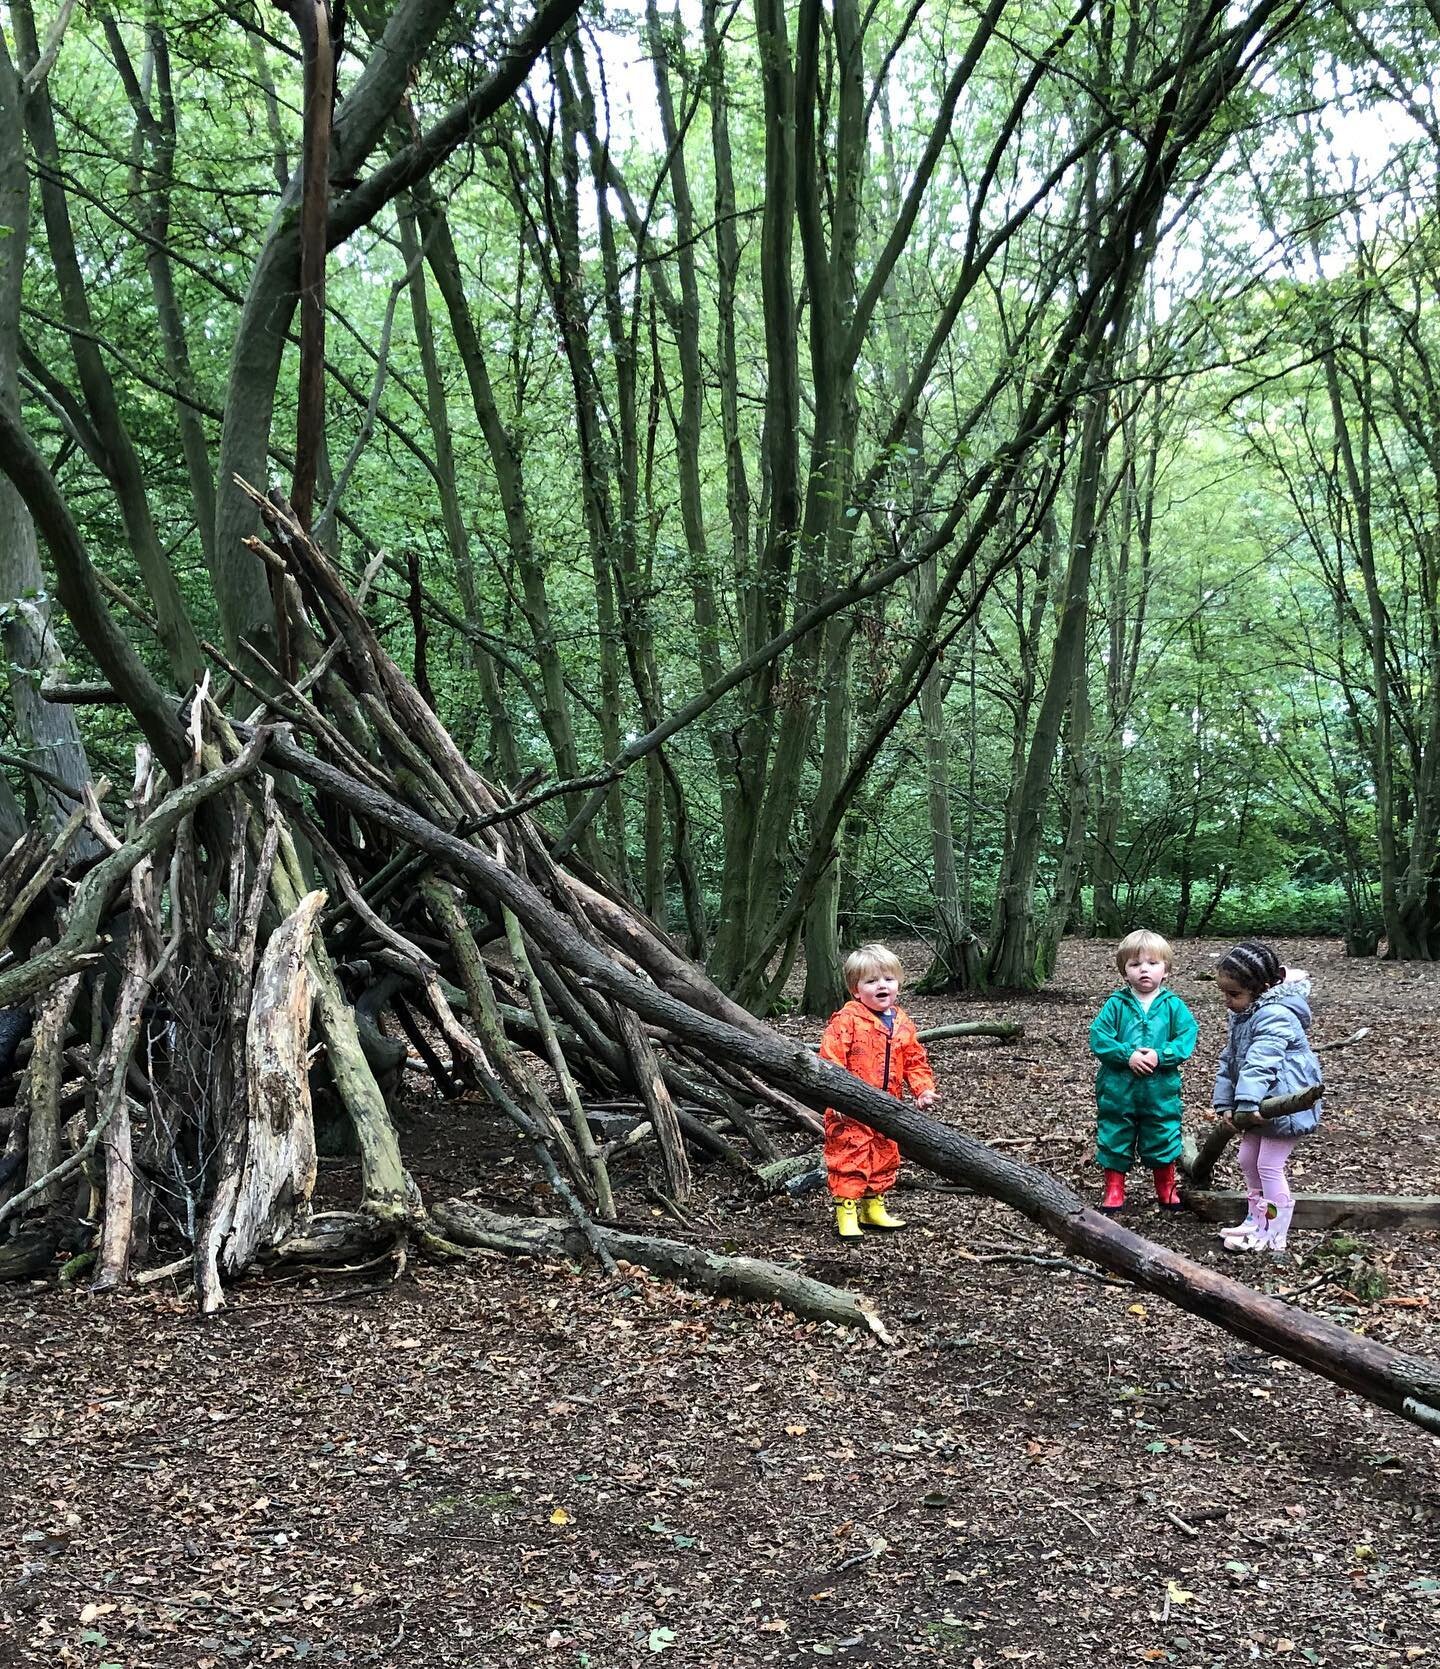 Keen for more den play? Grab your wellies (and a ticket!) and join us for next week&rsquo;s toddle in Sherrardspark Wood. 🌳 #trailtots

________________________________________________________

#natureplay #woodlandden #denbuilding #wgcmums #sherrar